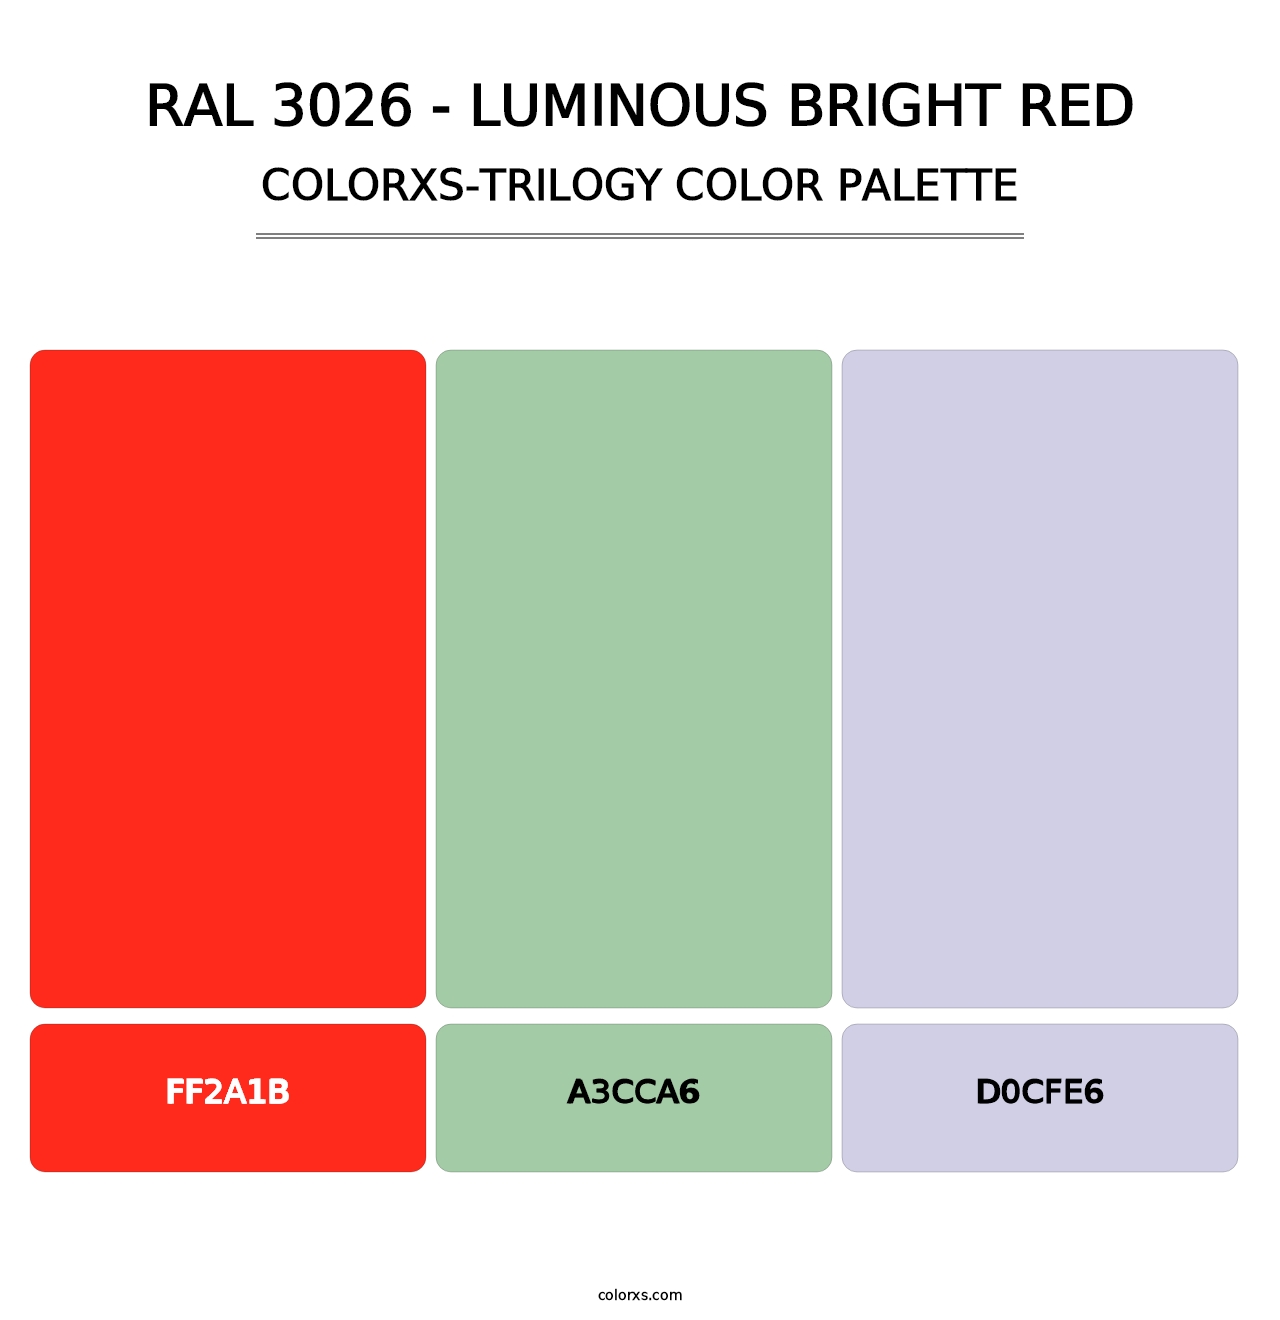 RAL 3026 - Luminous Bright Red - Colorxs Trilogy Palette